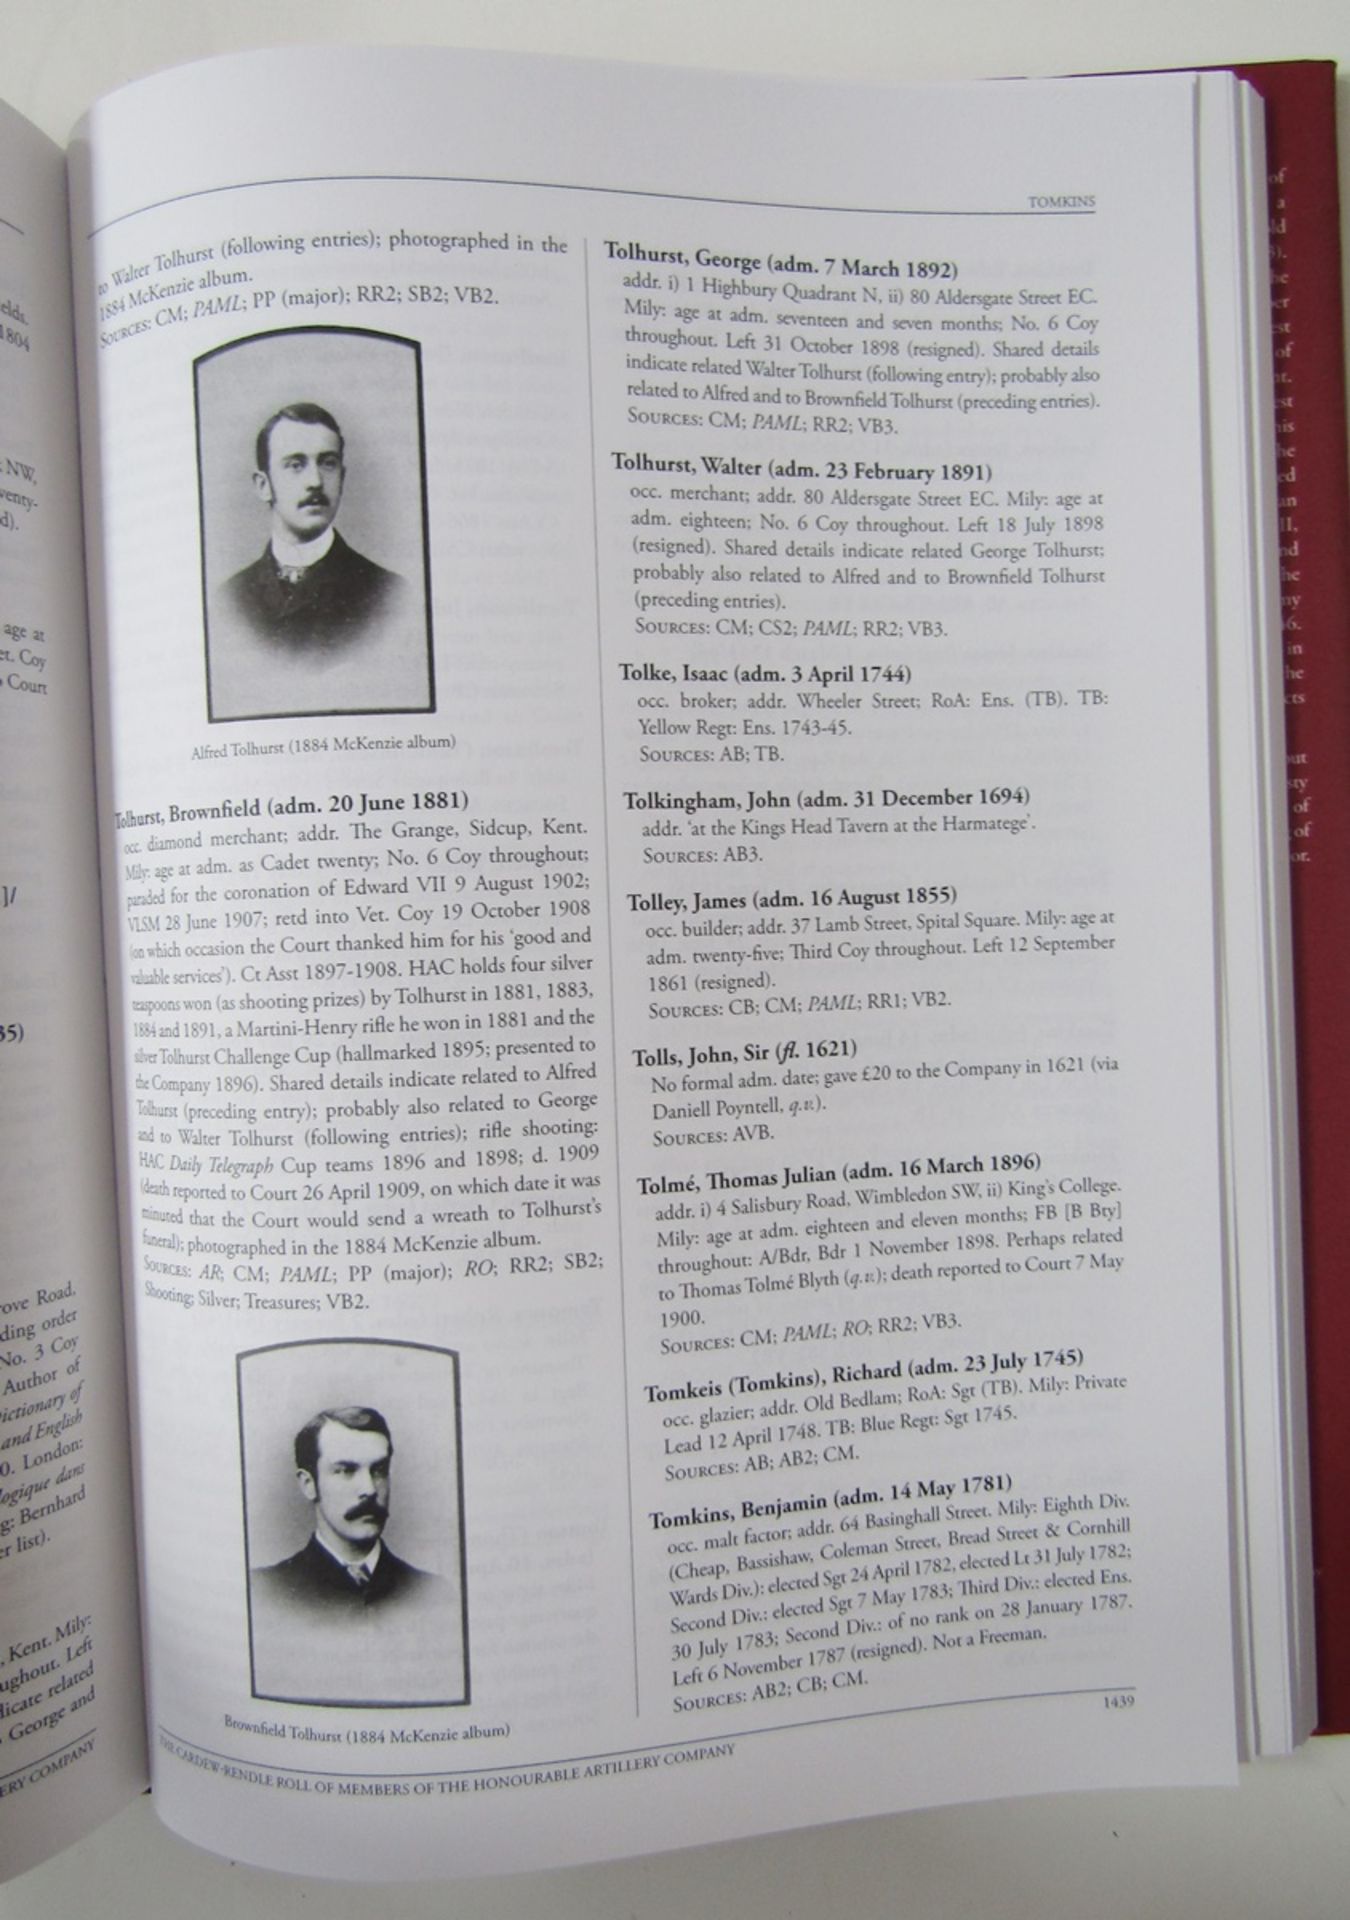 Bennett, Kirsty "The Cardew-Rendle Roll: A Biographical Directory of The Honourable Artillery - Image 18 of 23